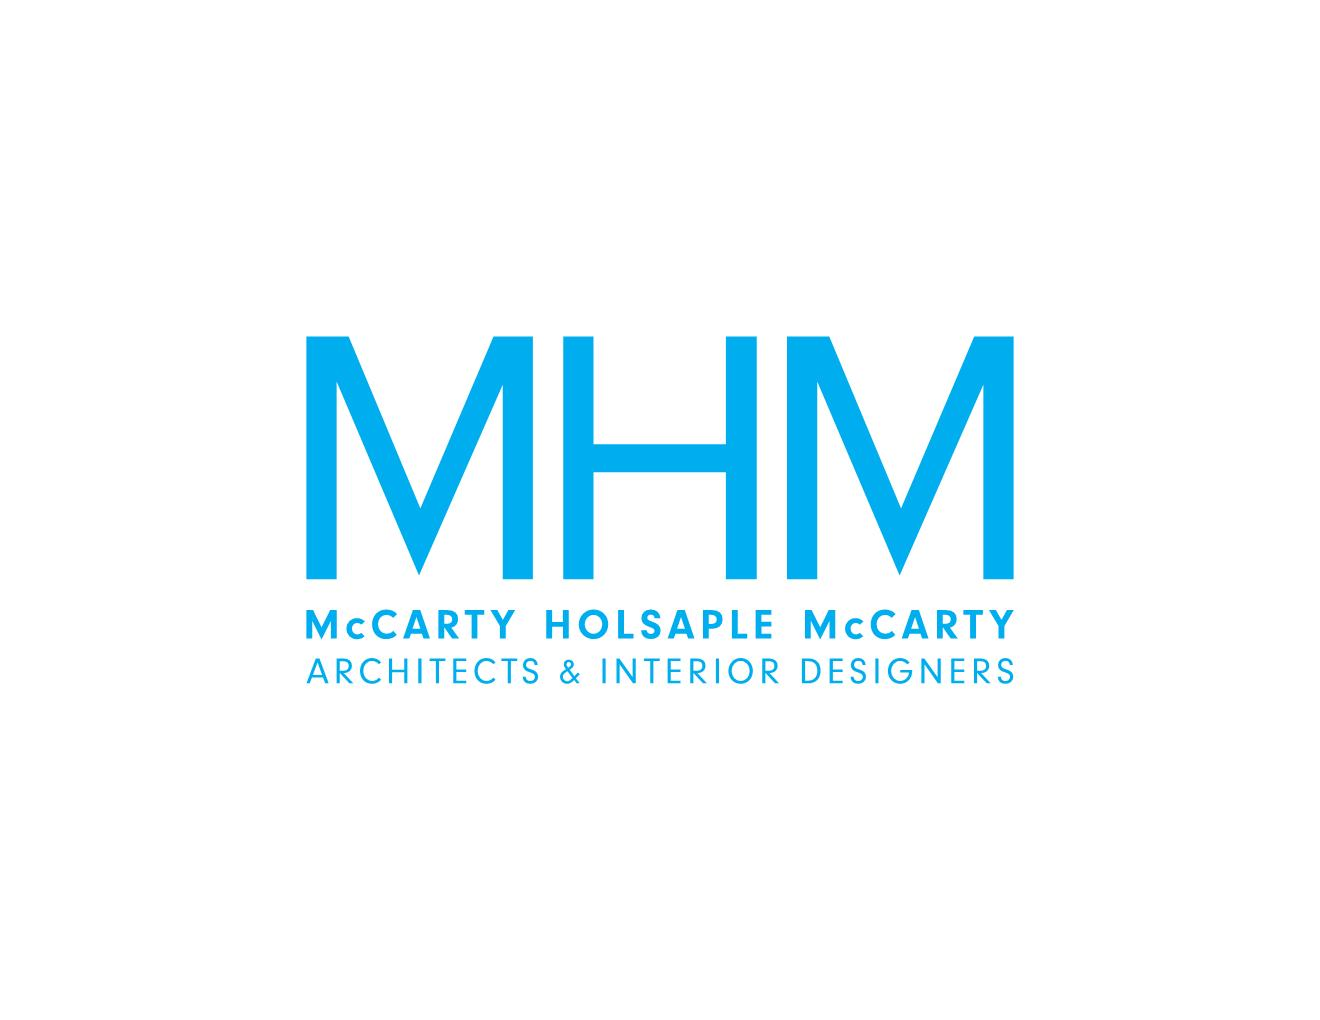 McCarty Holsaple McCarty Architects and Interior Designers logo